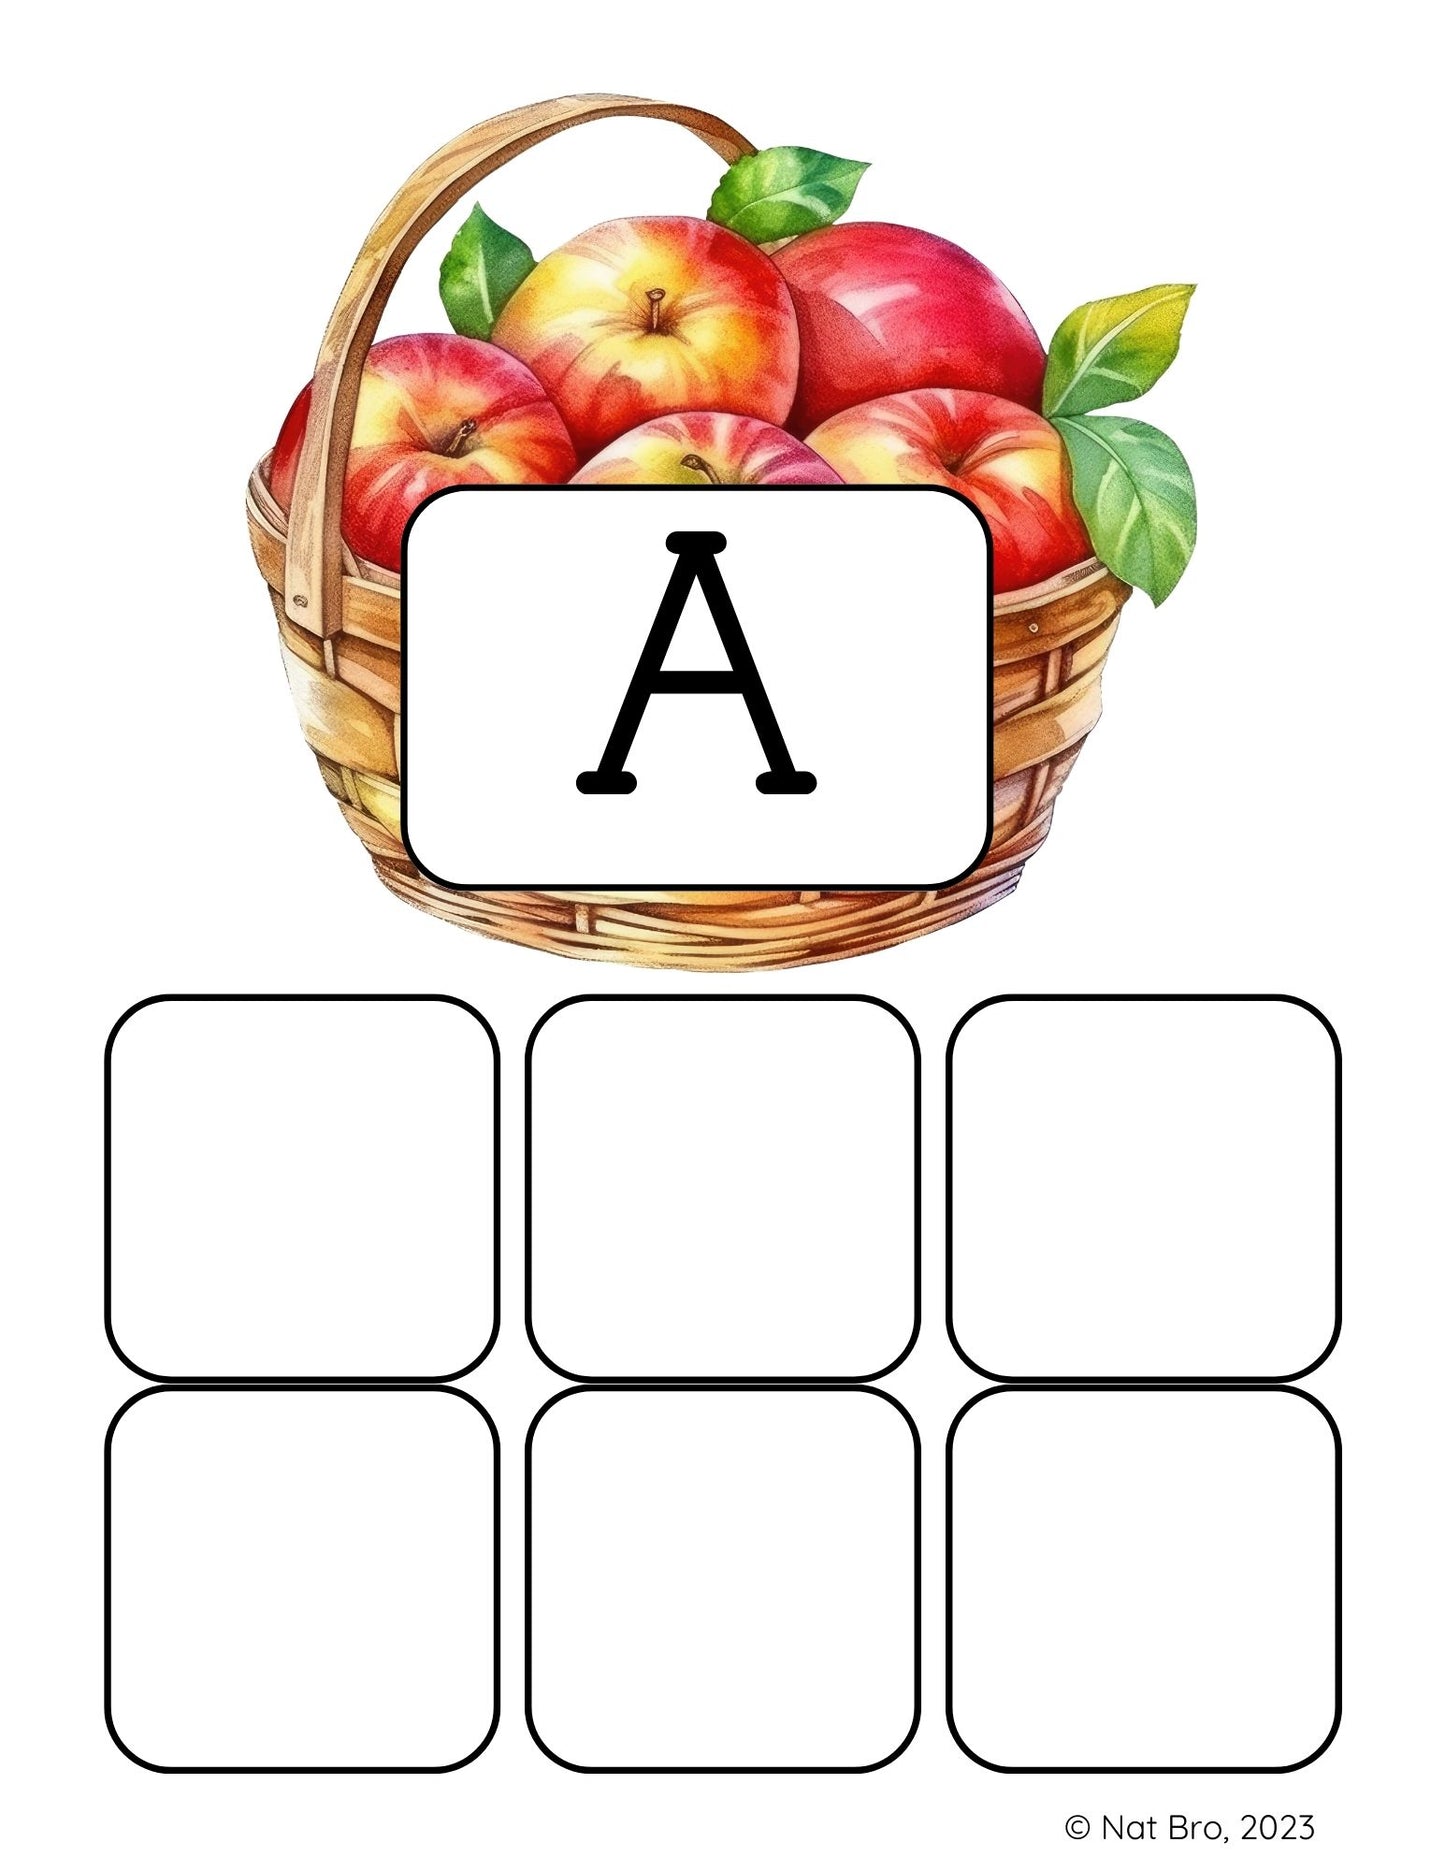 Picture/Letter Matching Game for Pre-K